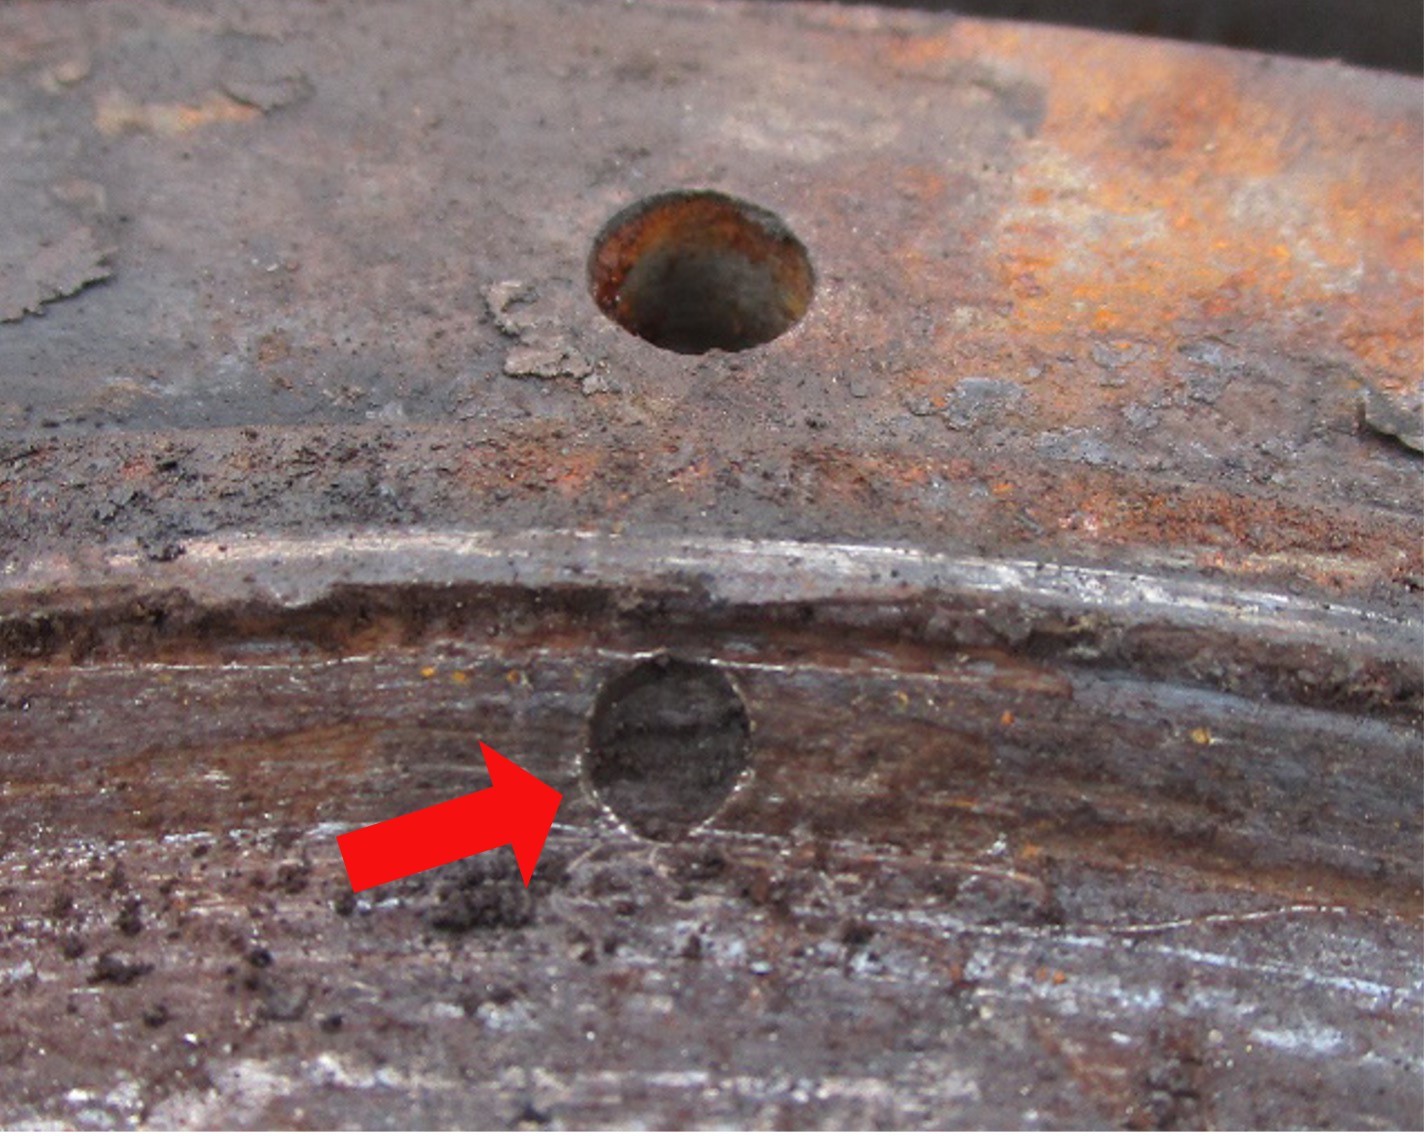 A close-up of the obstructed port that provides lubrication of the main shaft bearing